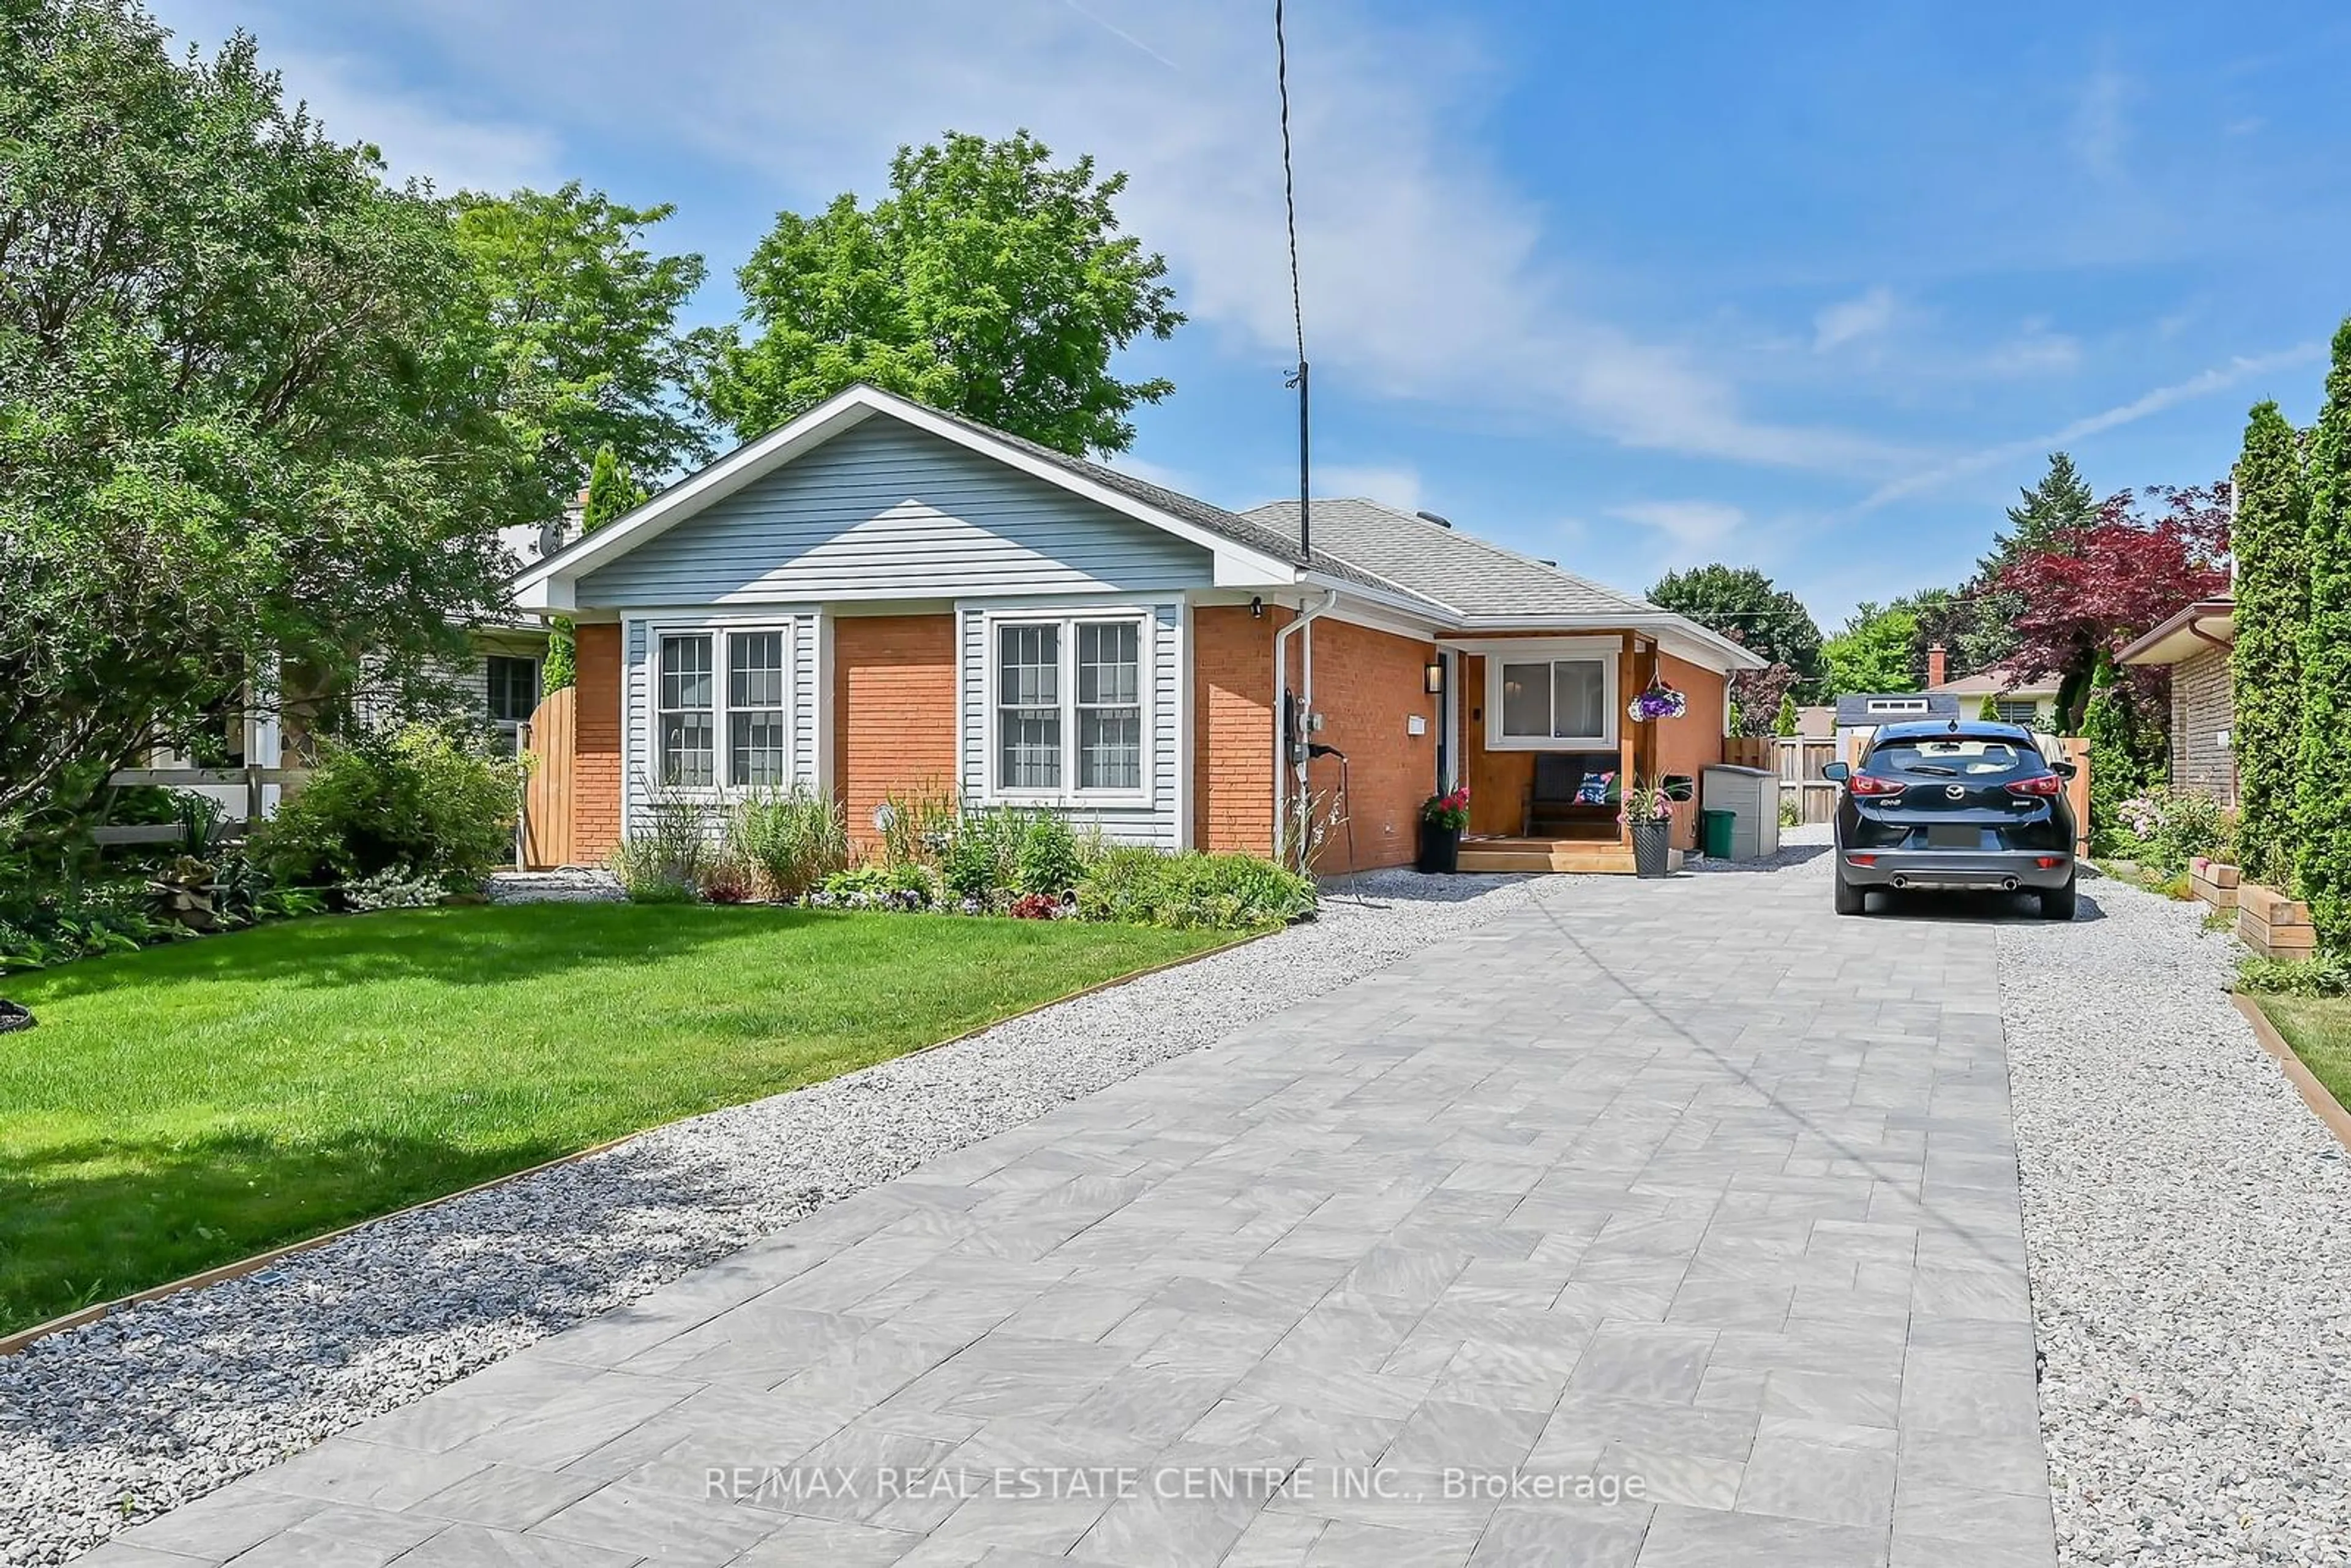 Home with brick exterior material for 23 Ameer Dr, St. Catharines Ontario L2N 3S9